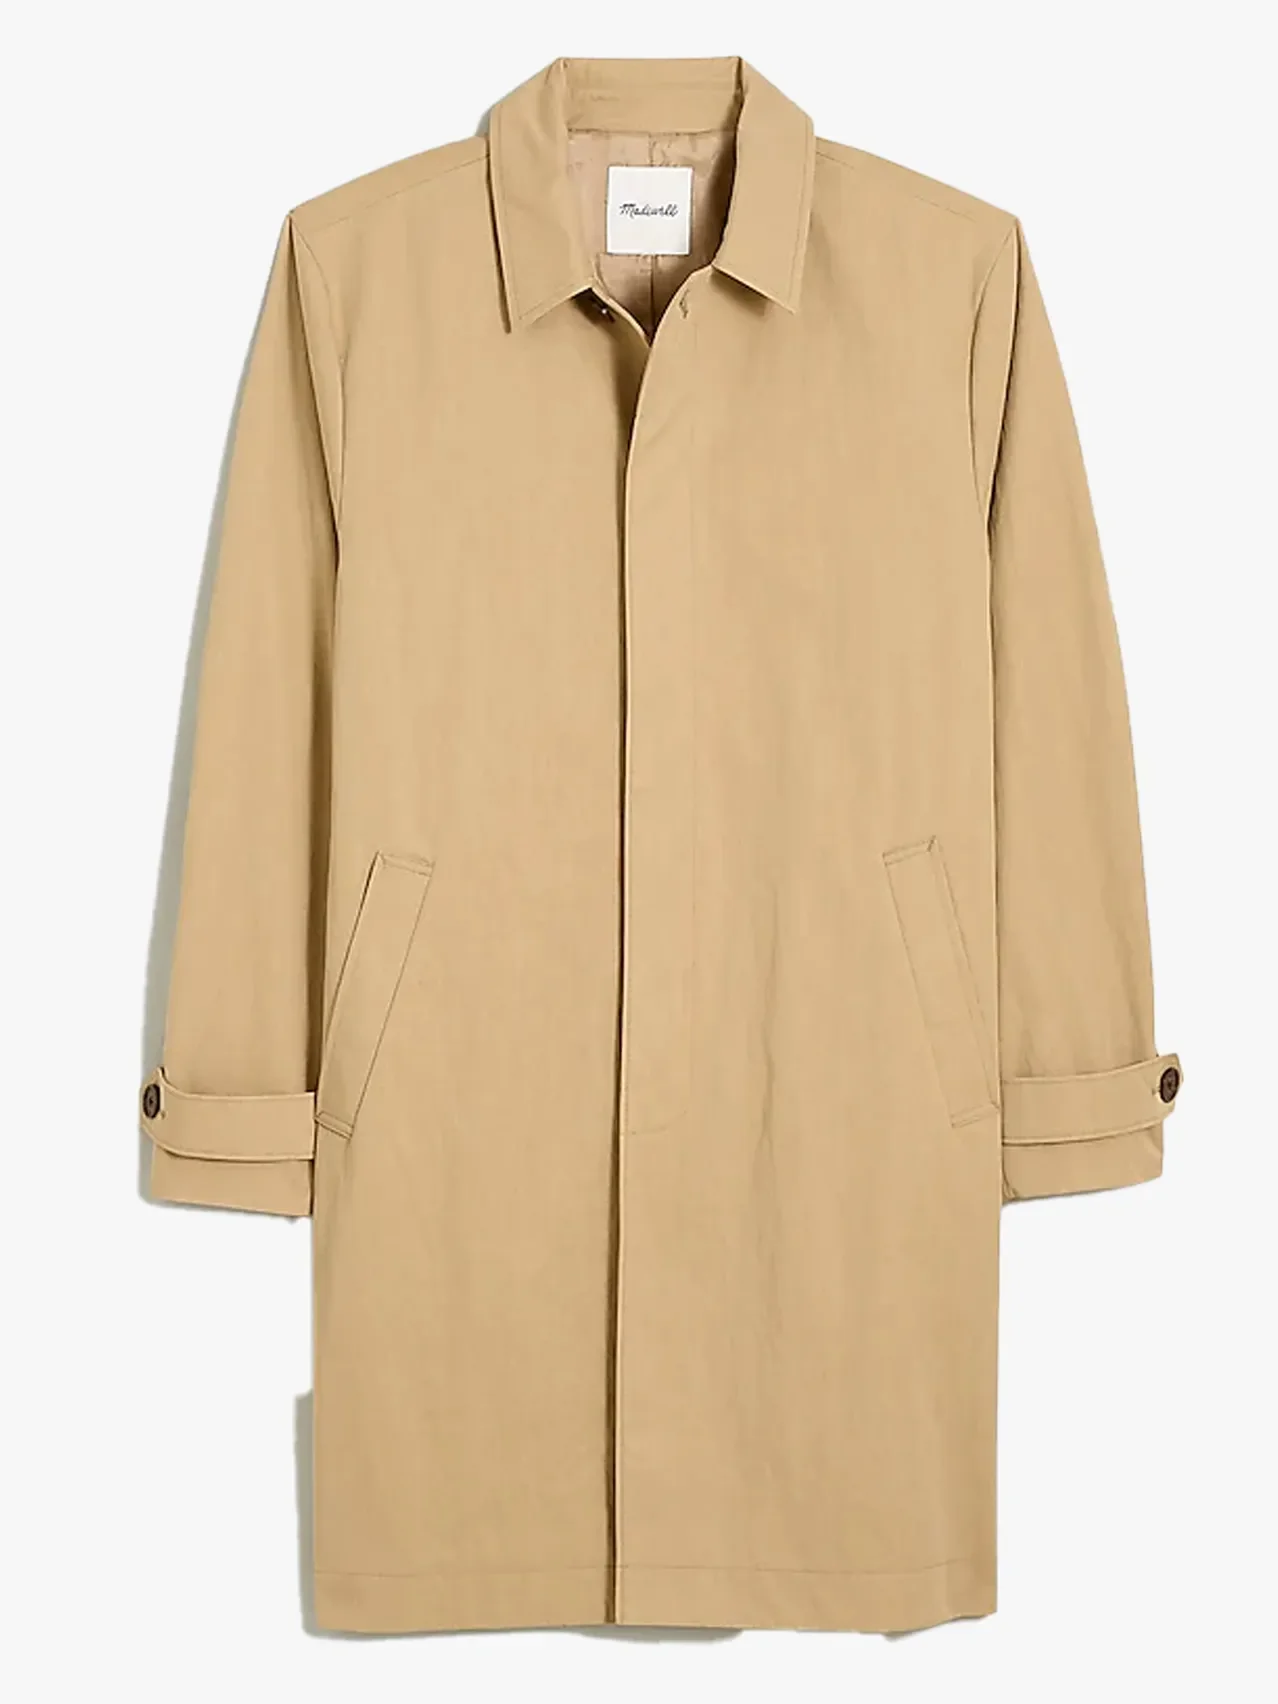 Madewell Trench Coat